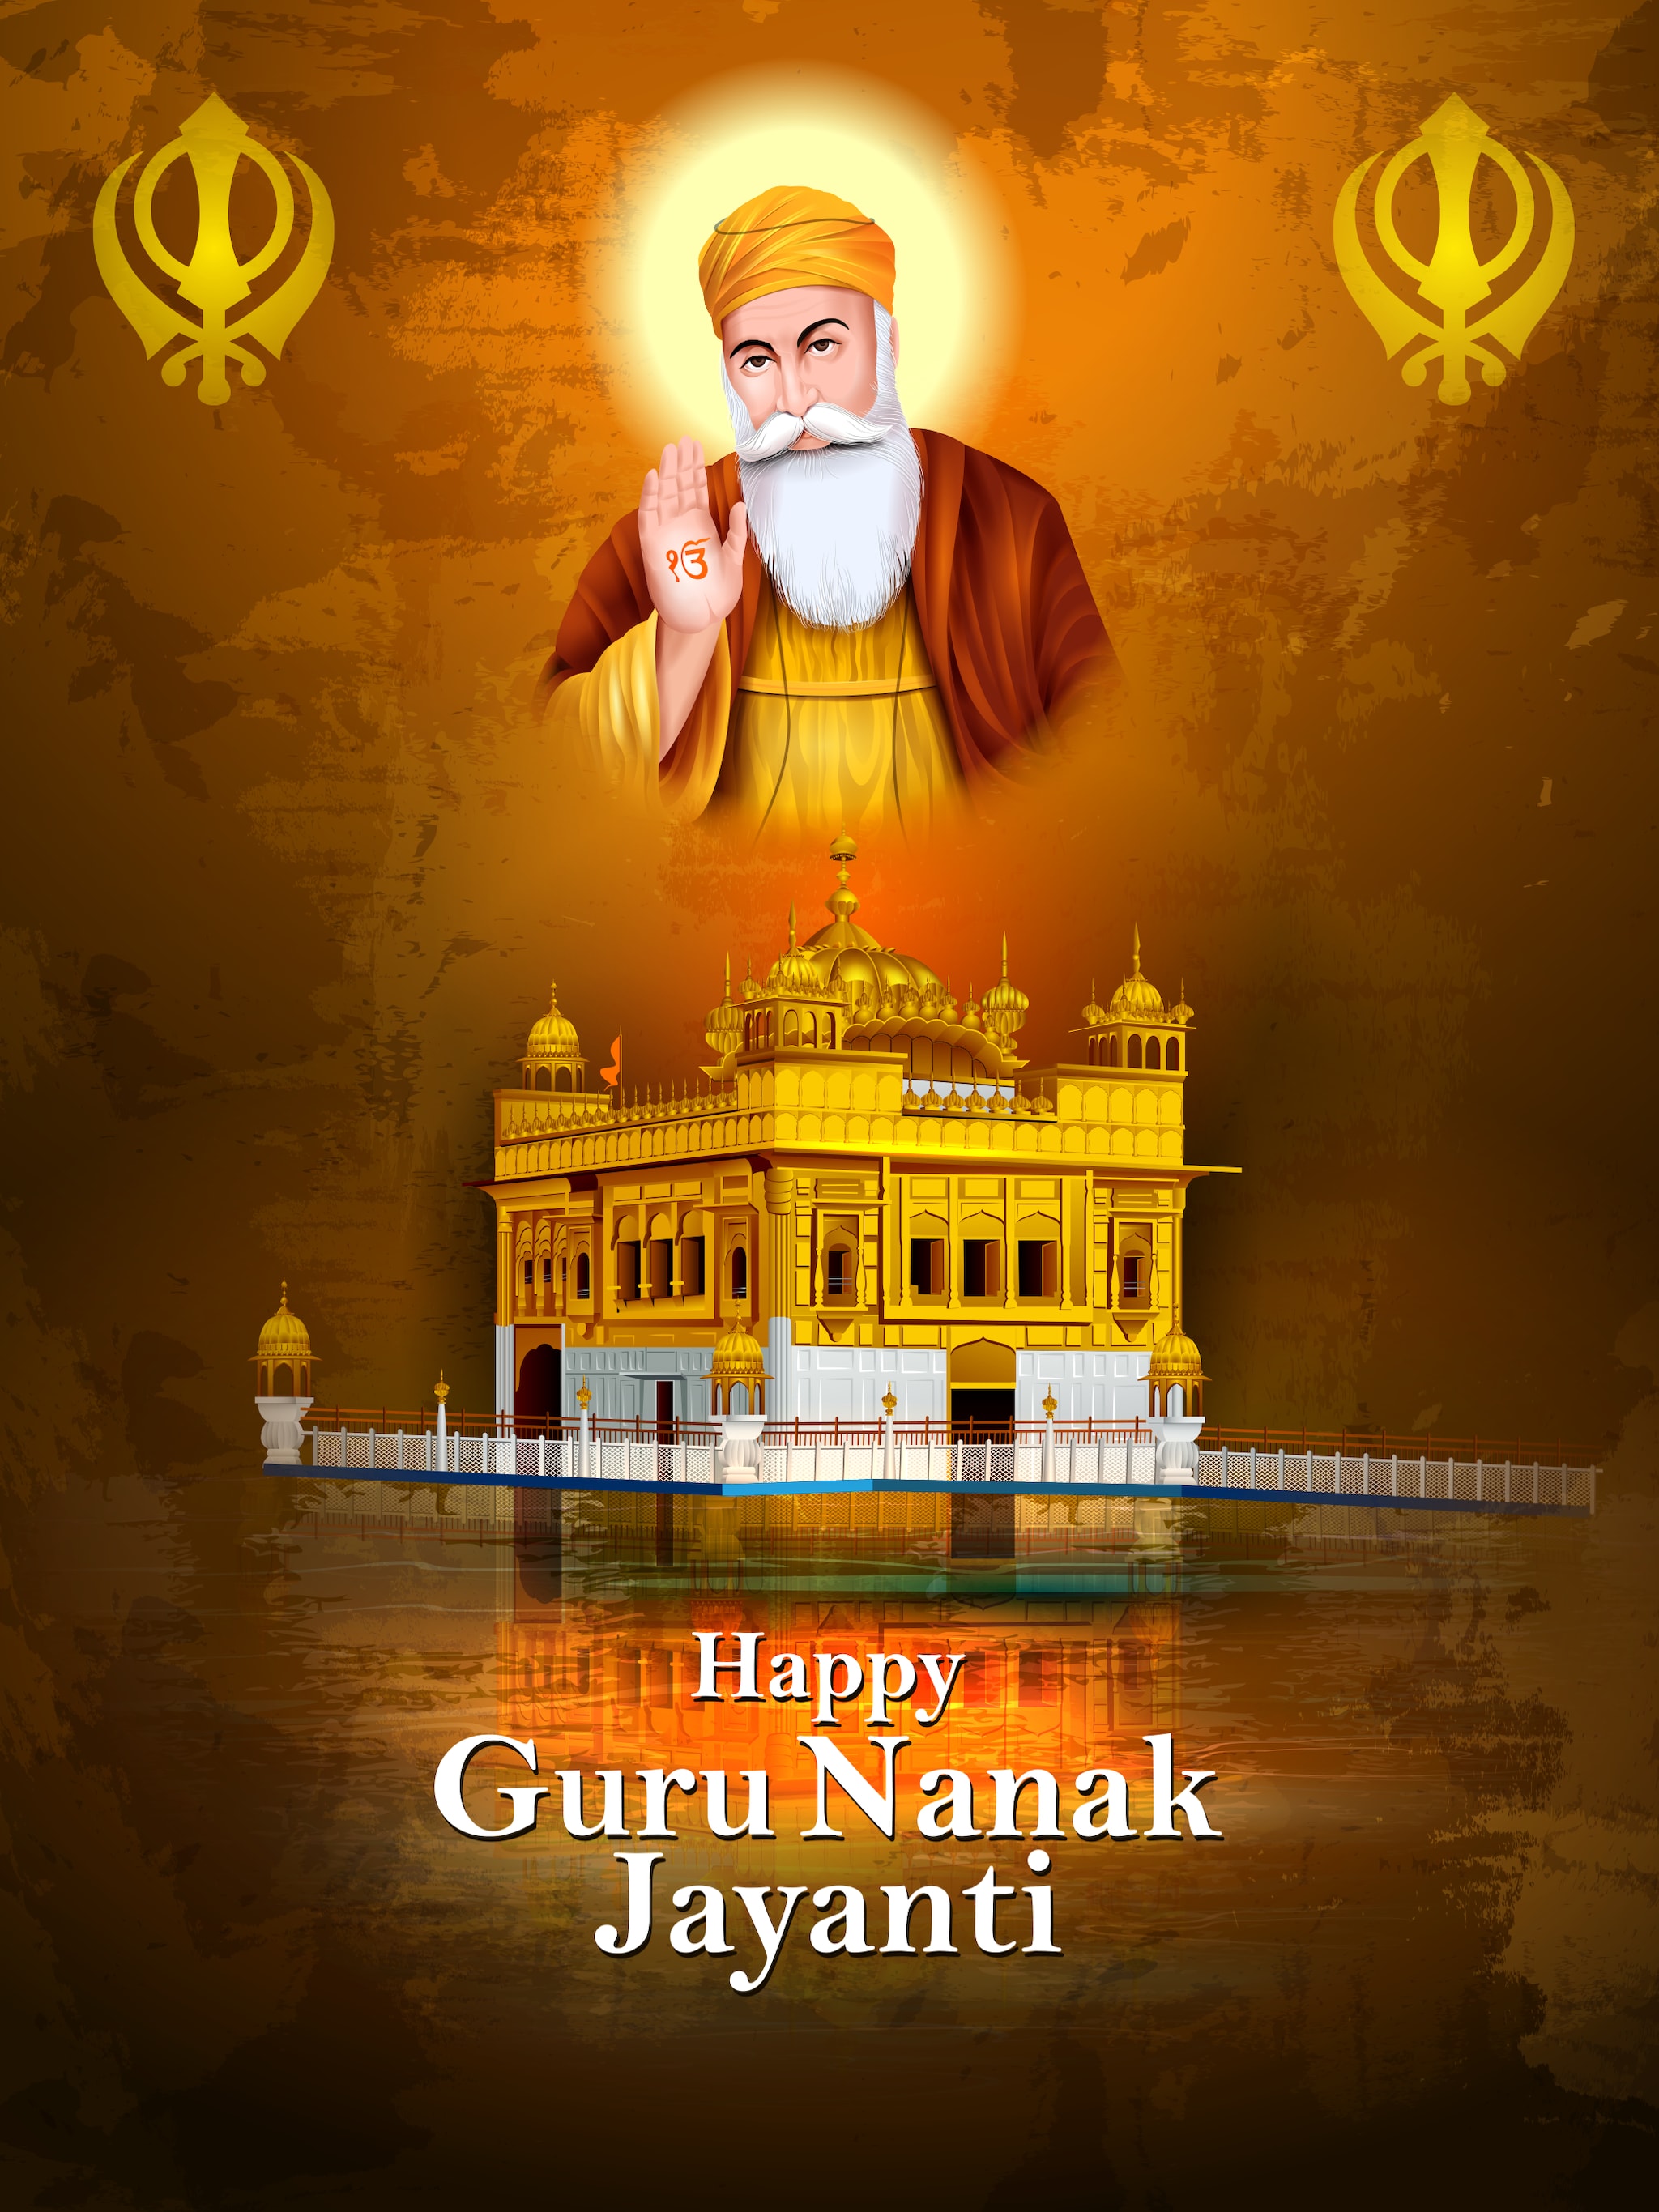 Happy Guru Nanak Jayanti 2021 Wishes Images, Wallpapers, Quotes, Status, Photos, Photos, SMS, Messages. (Image: Shutterstock)